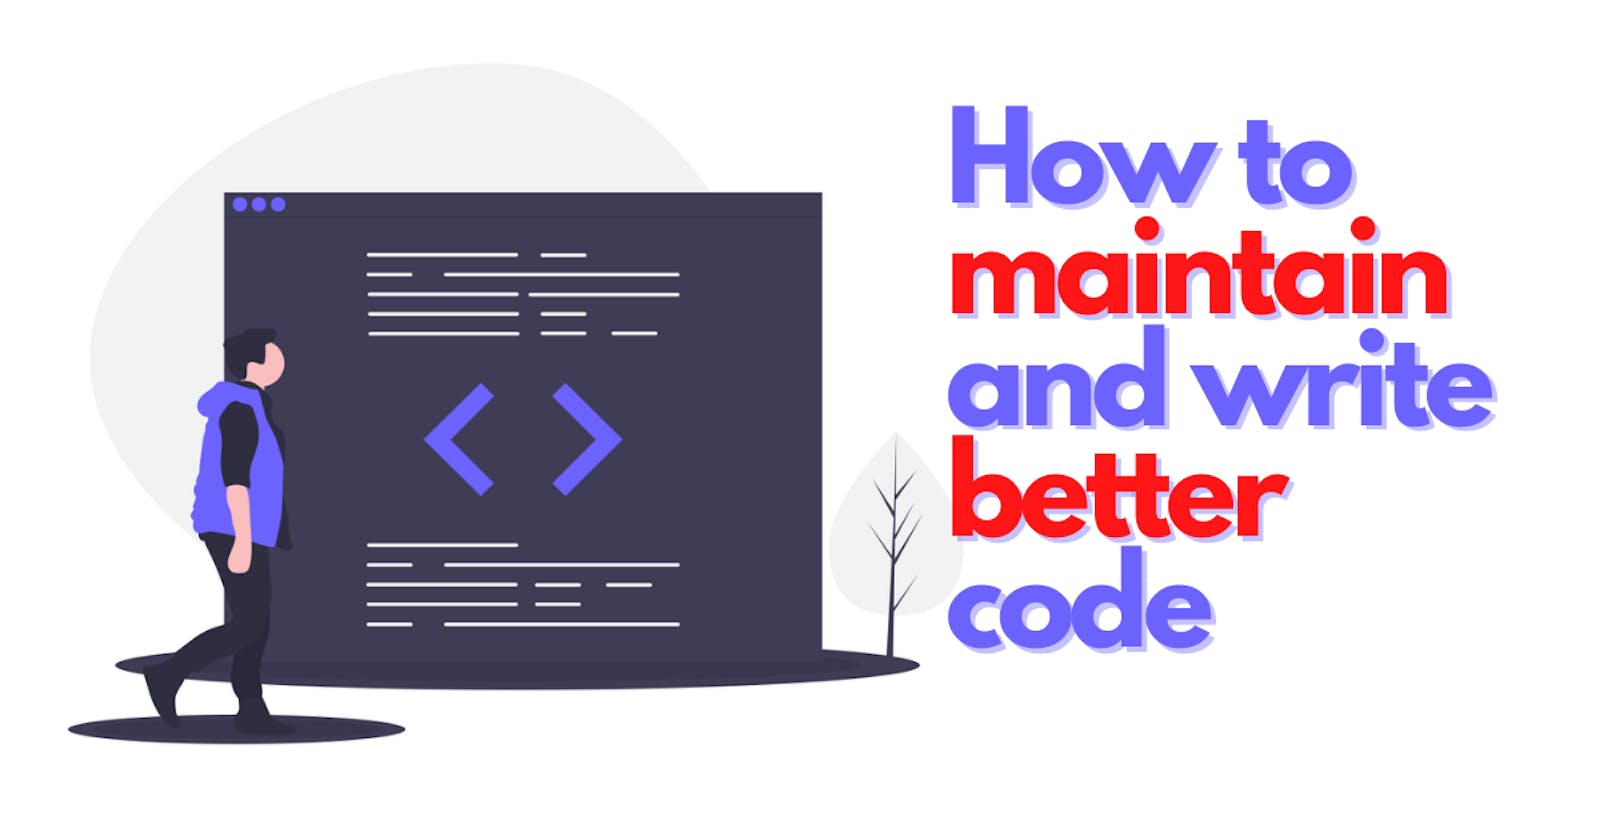 How to Maintain and Write better code